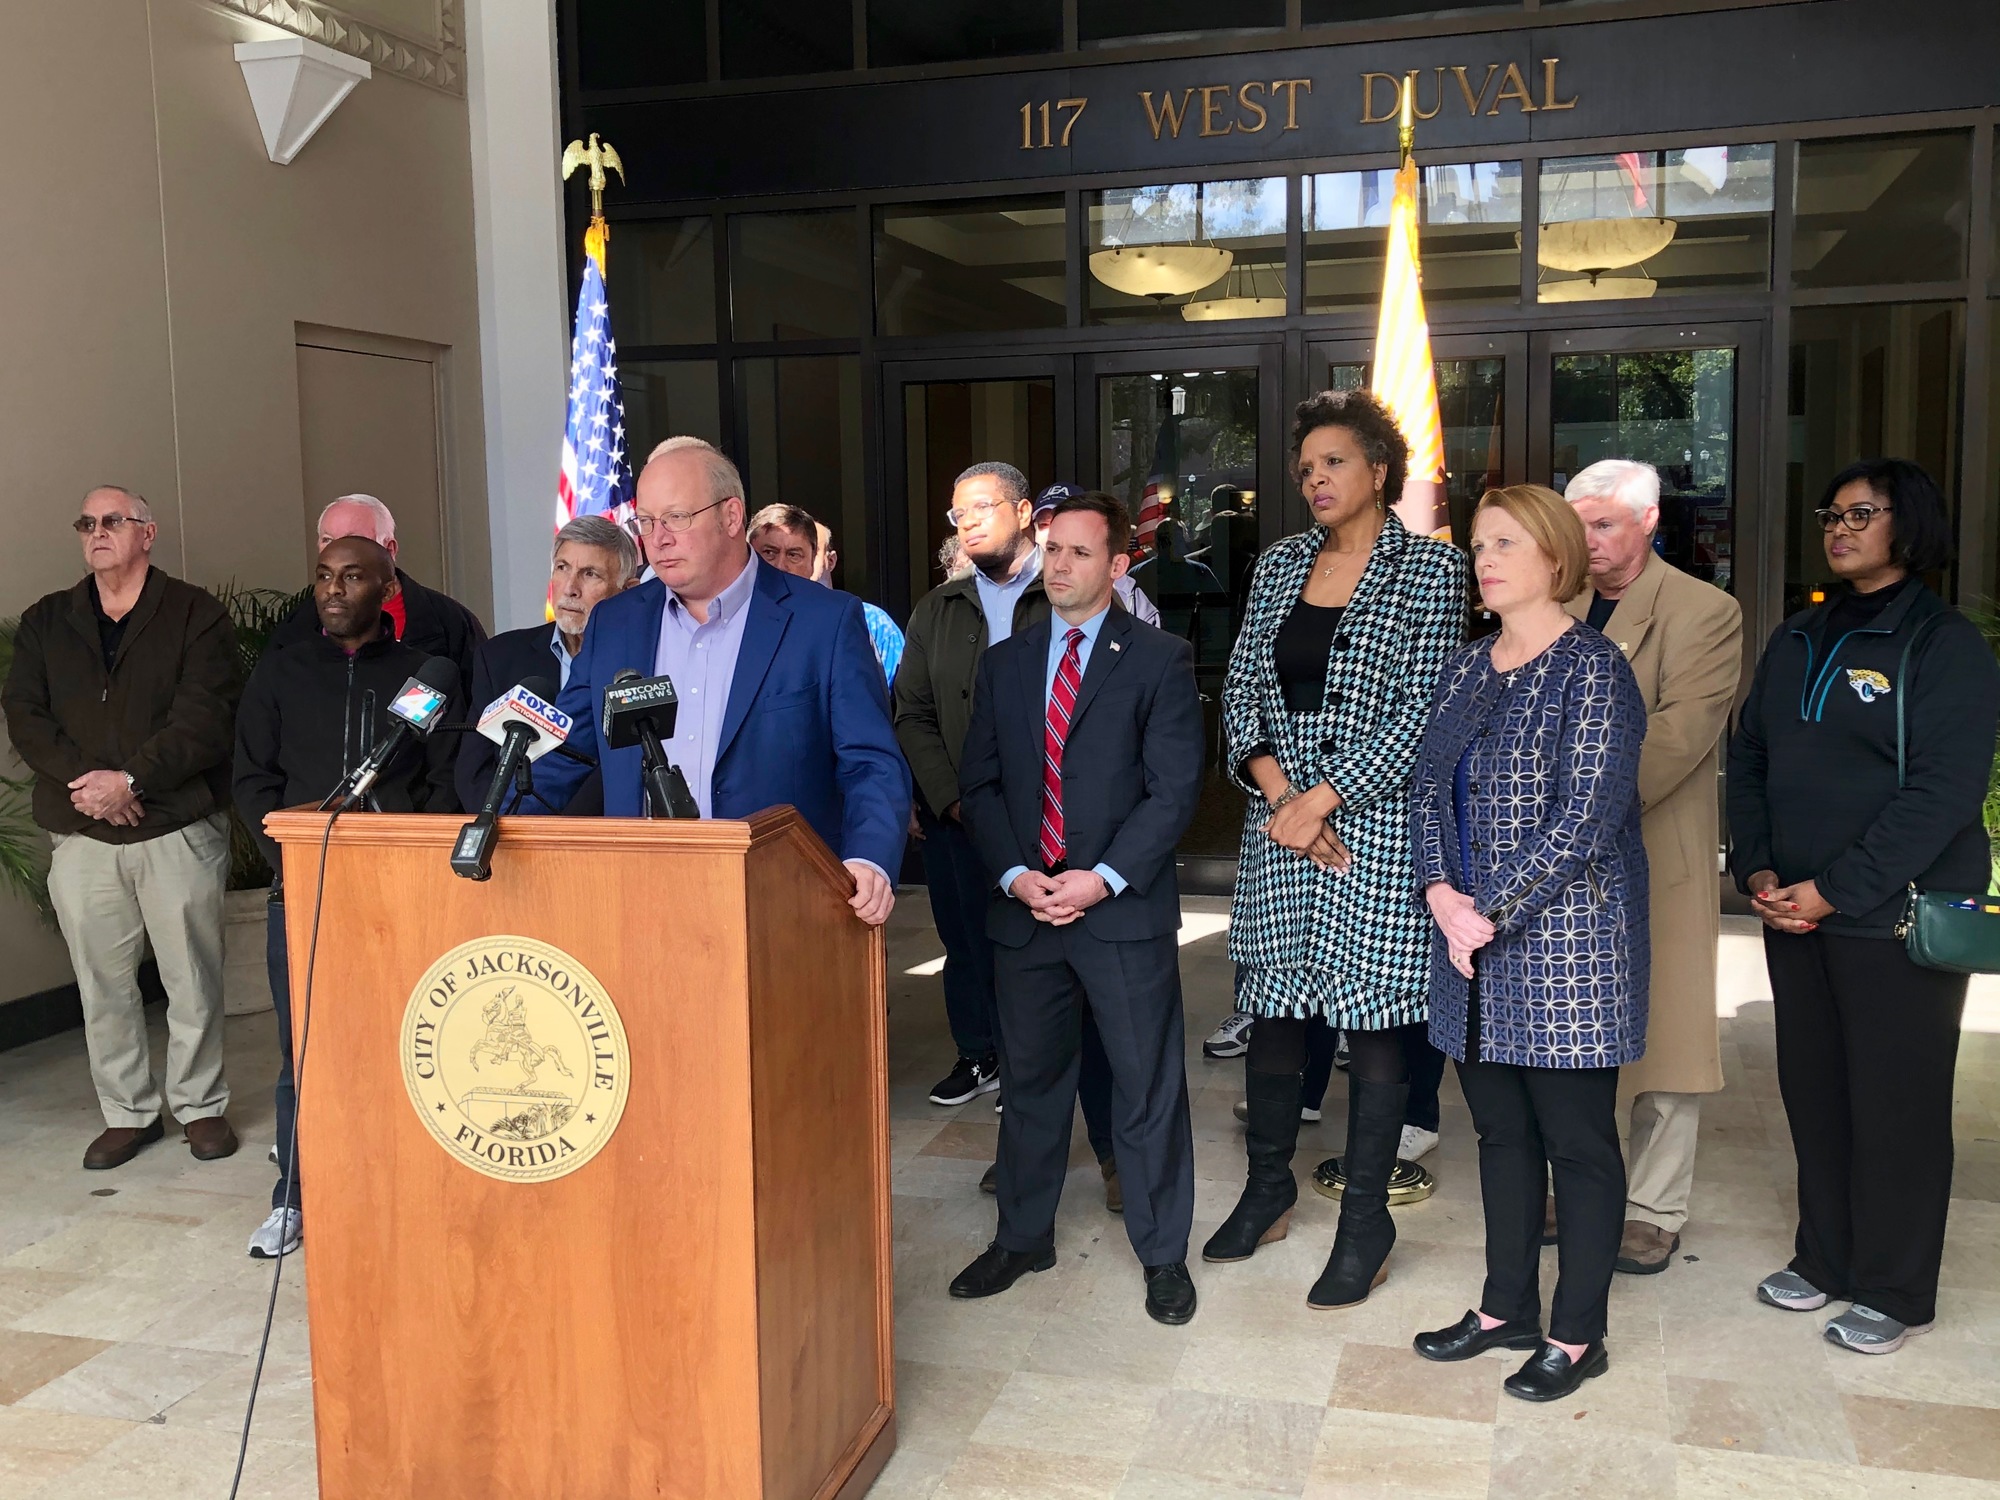 Council members, JEA employees and the chairs of the Duval County Democrat and Republican parties join City Council President Scott Wilson at the Jan. 20 press conference.